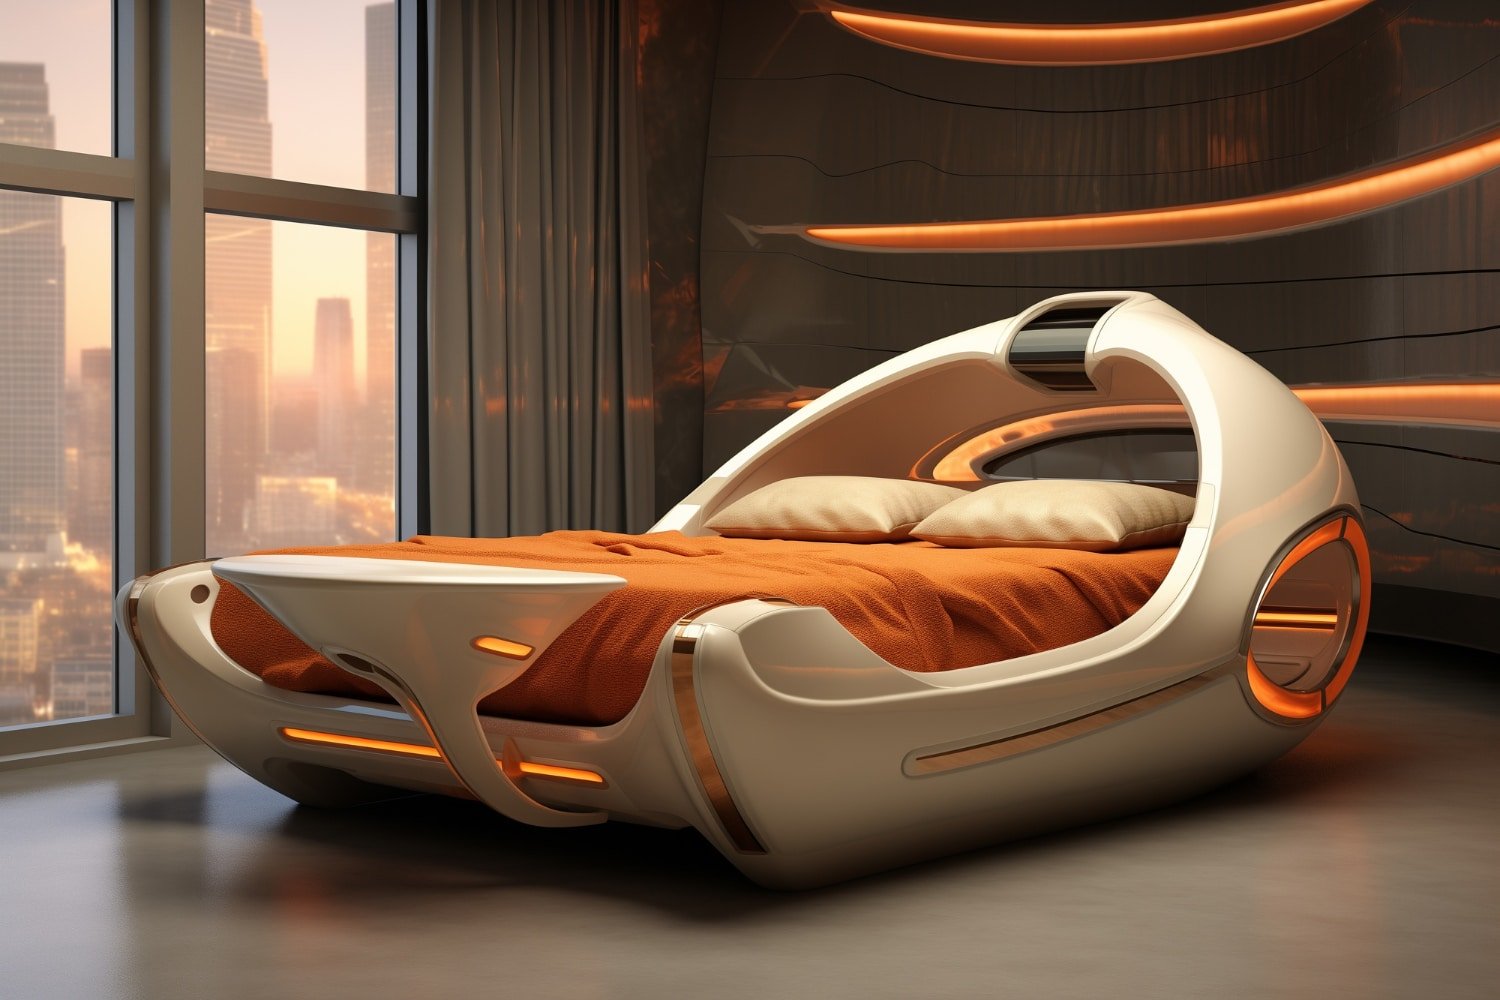 You are currently viewing Kokoon Technology LTD: The Future of Sleep and Relaxation Technology